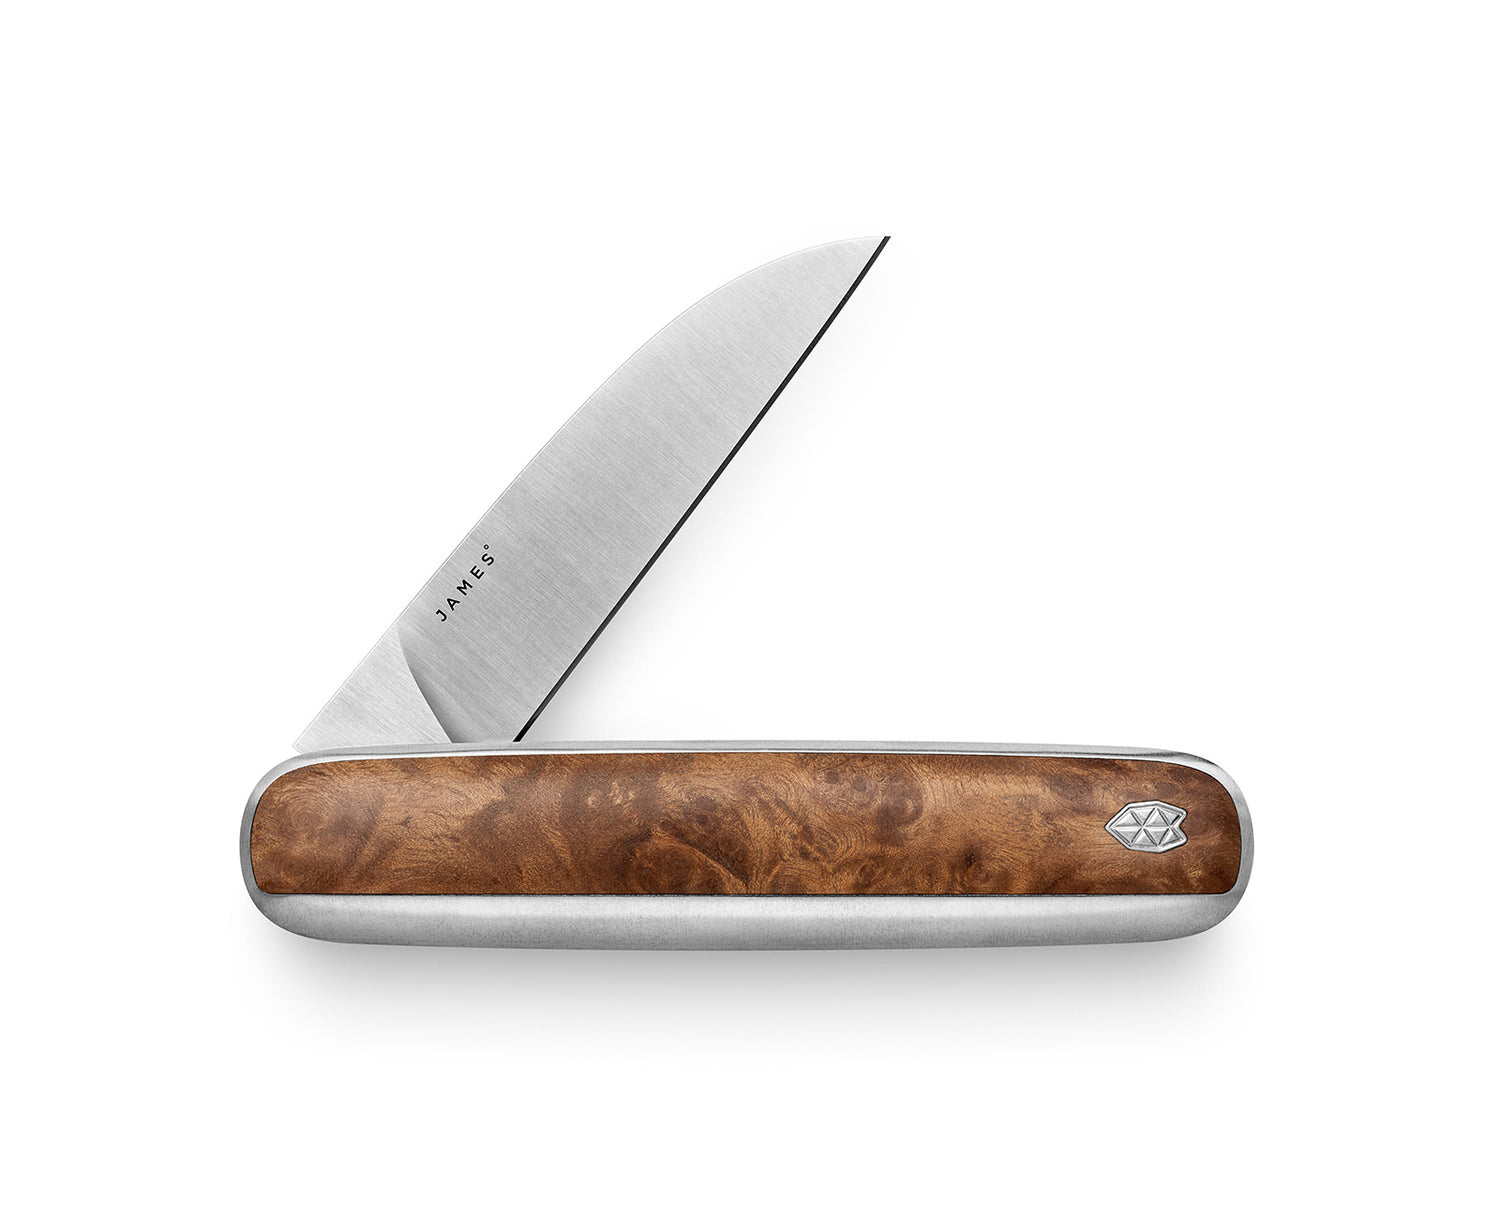 Not your Grandfather’s pocket knife.